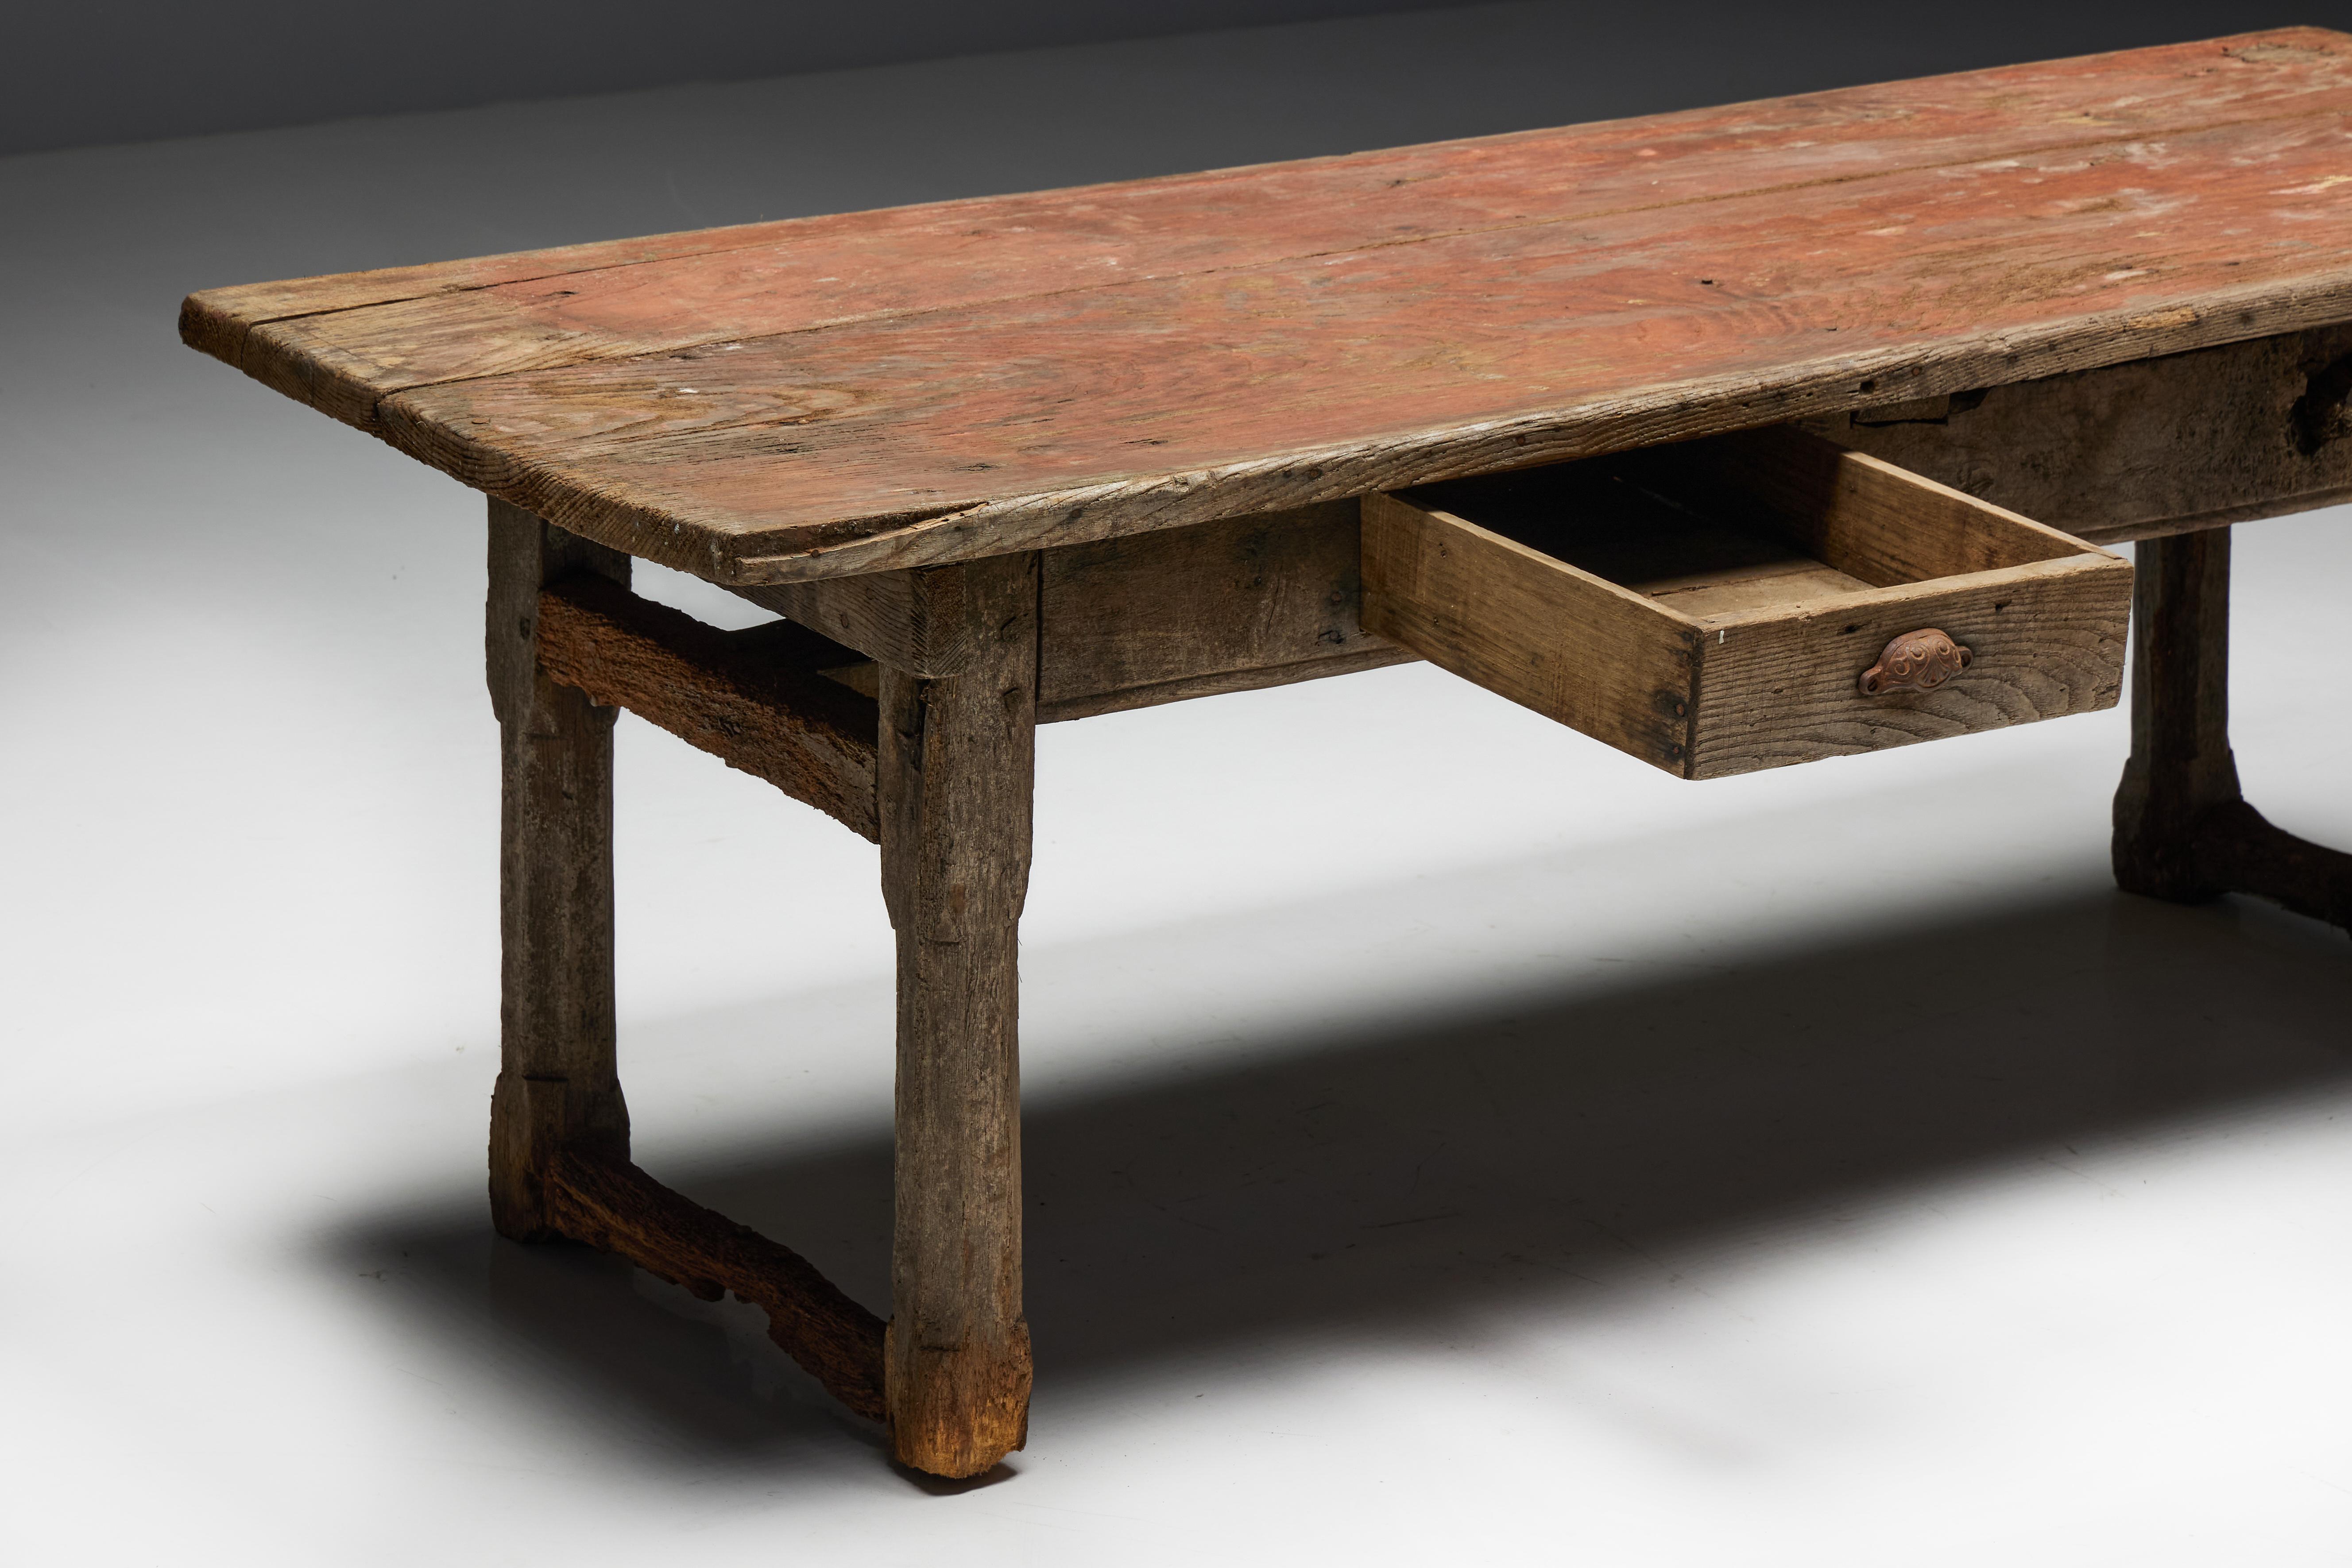 Wood Rustic Travail Populaire Dining Table, France, Early 19th Century For Sale